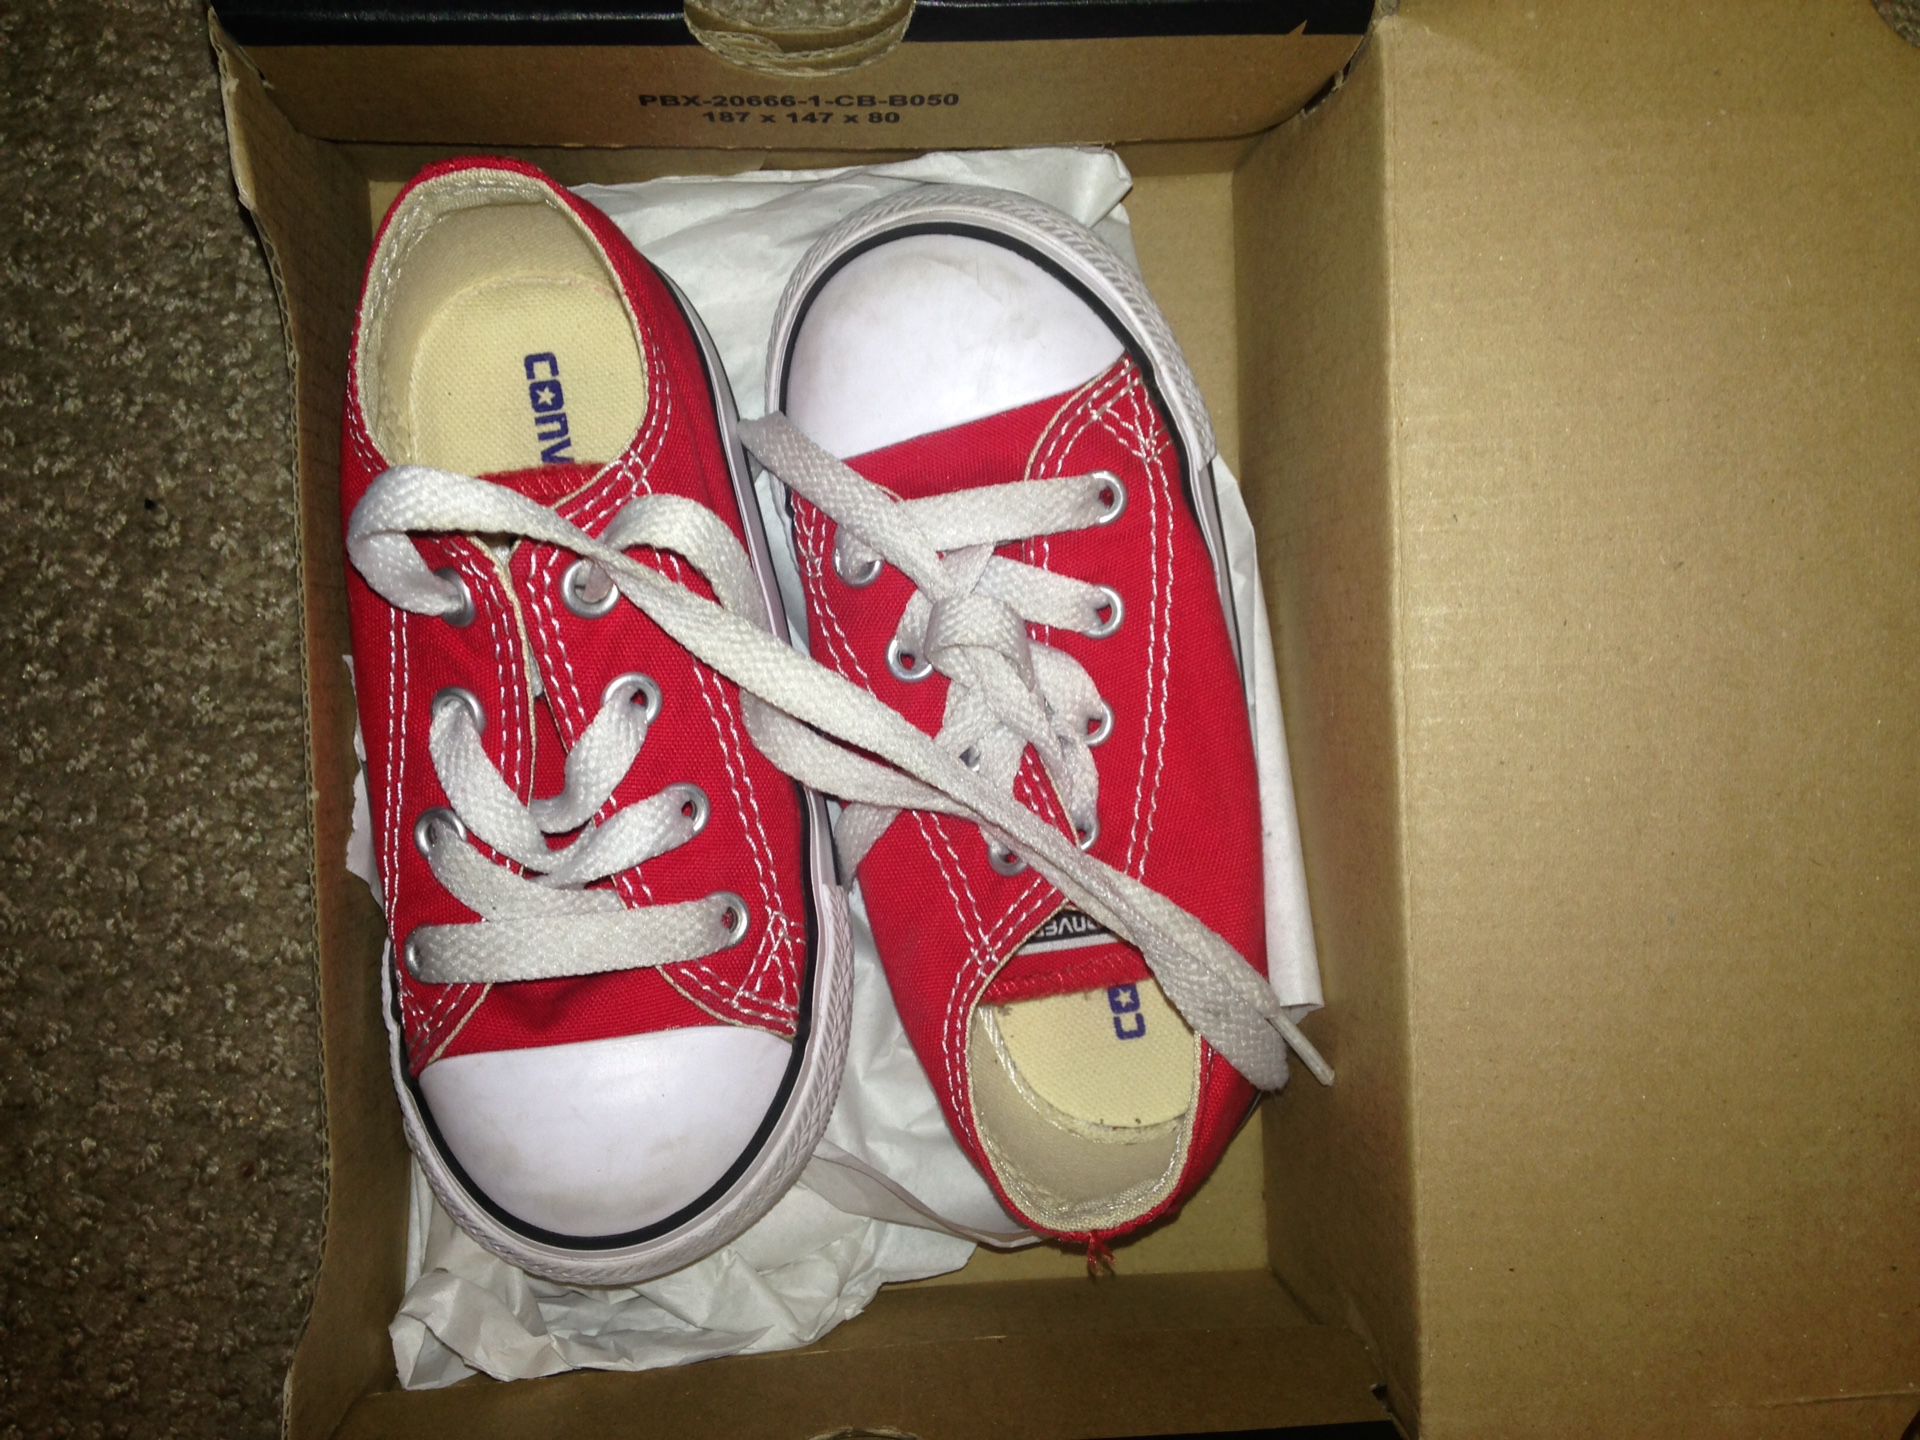 Gently worn red Converse size 7c $20